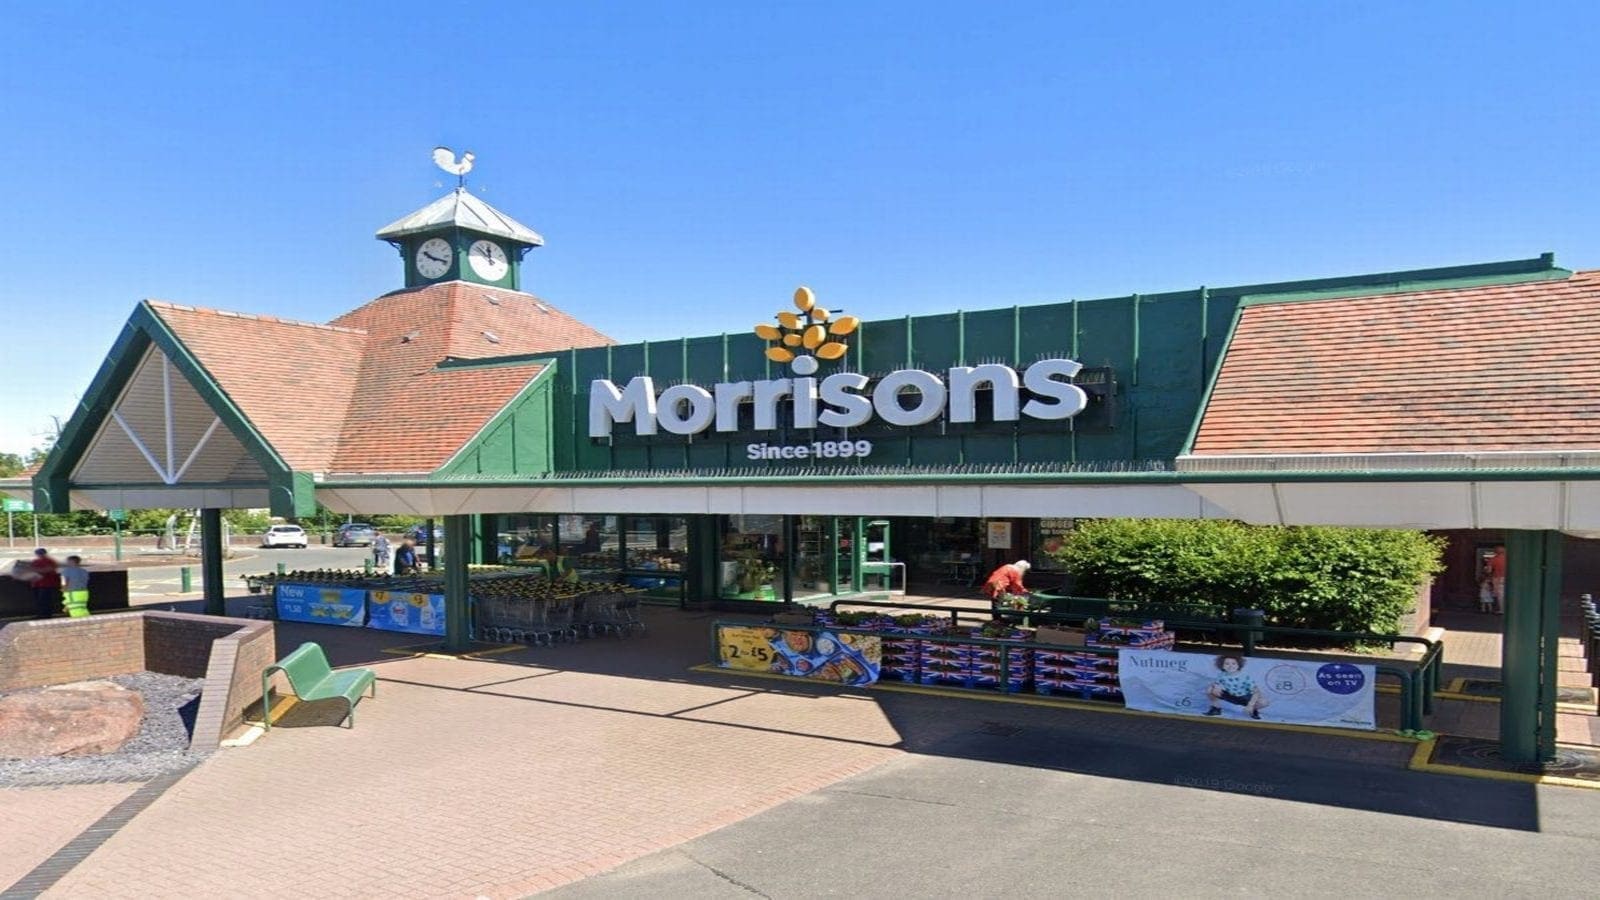 Morrisons takeover bid heats up as private equity firm CD&R sweetens offer to US$9.54Bn